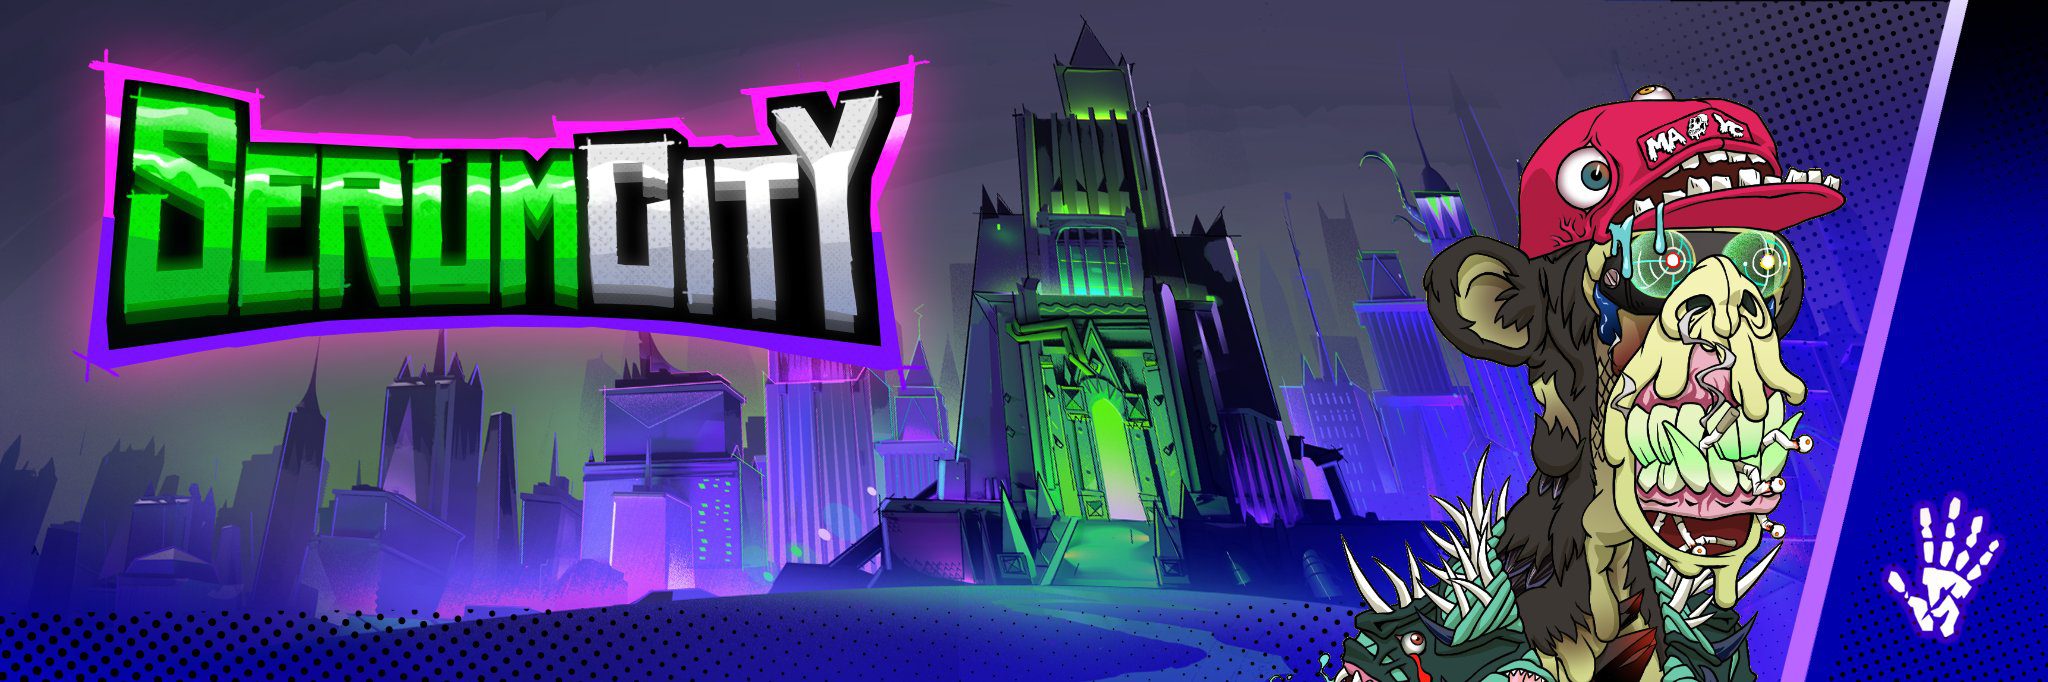 Unveiling Serum City: A New Era of NFT Gaming with Mutant Ape Yacht Club and Beyond